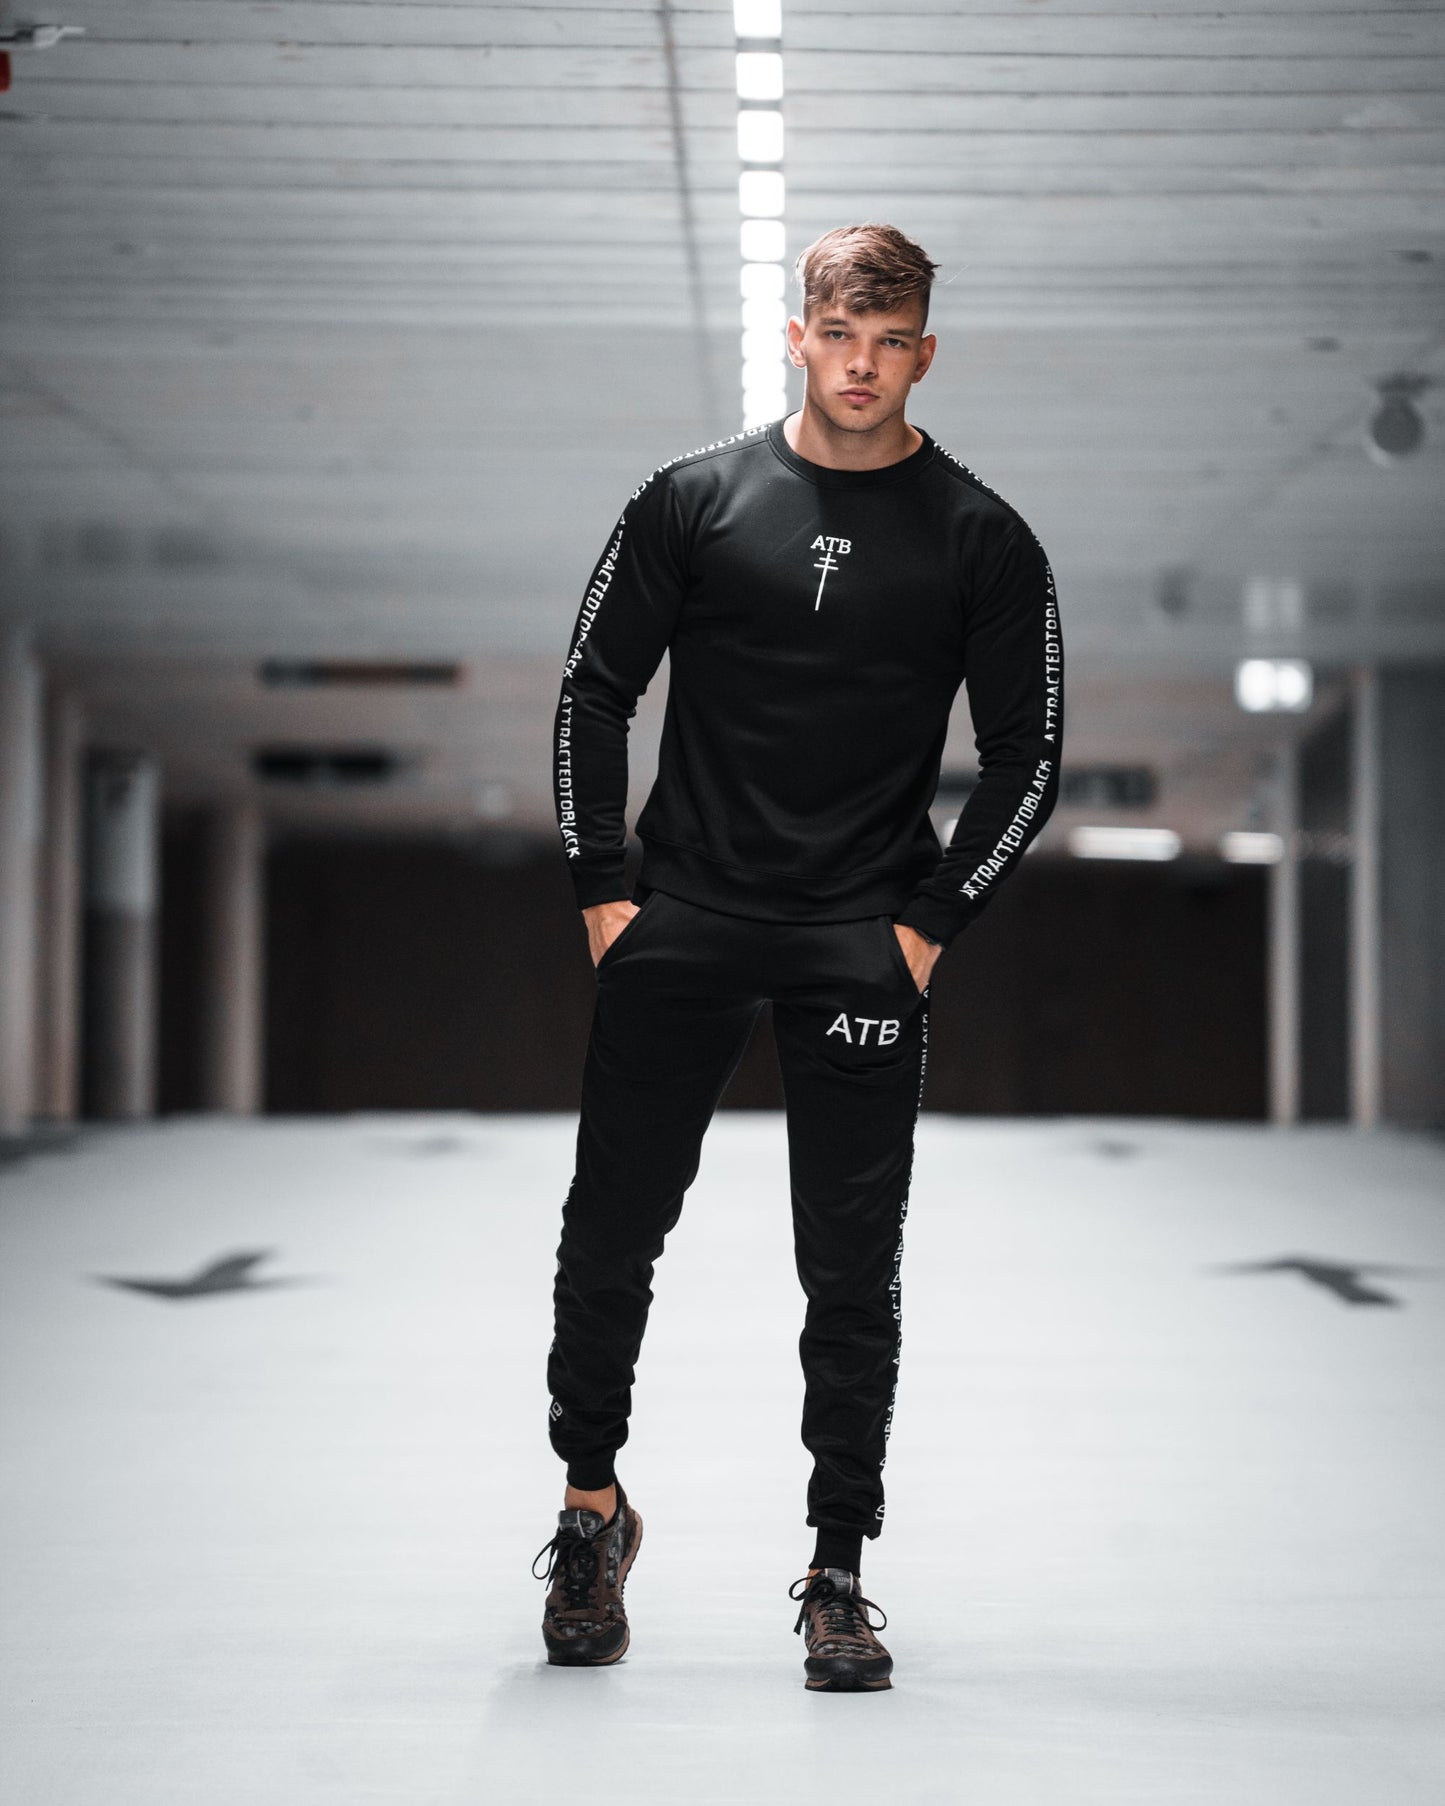 The Daily Fit Jogger - Attractedtoblack